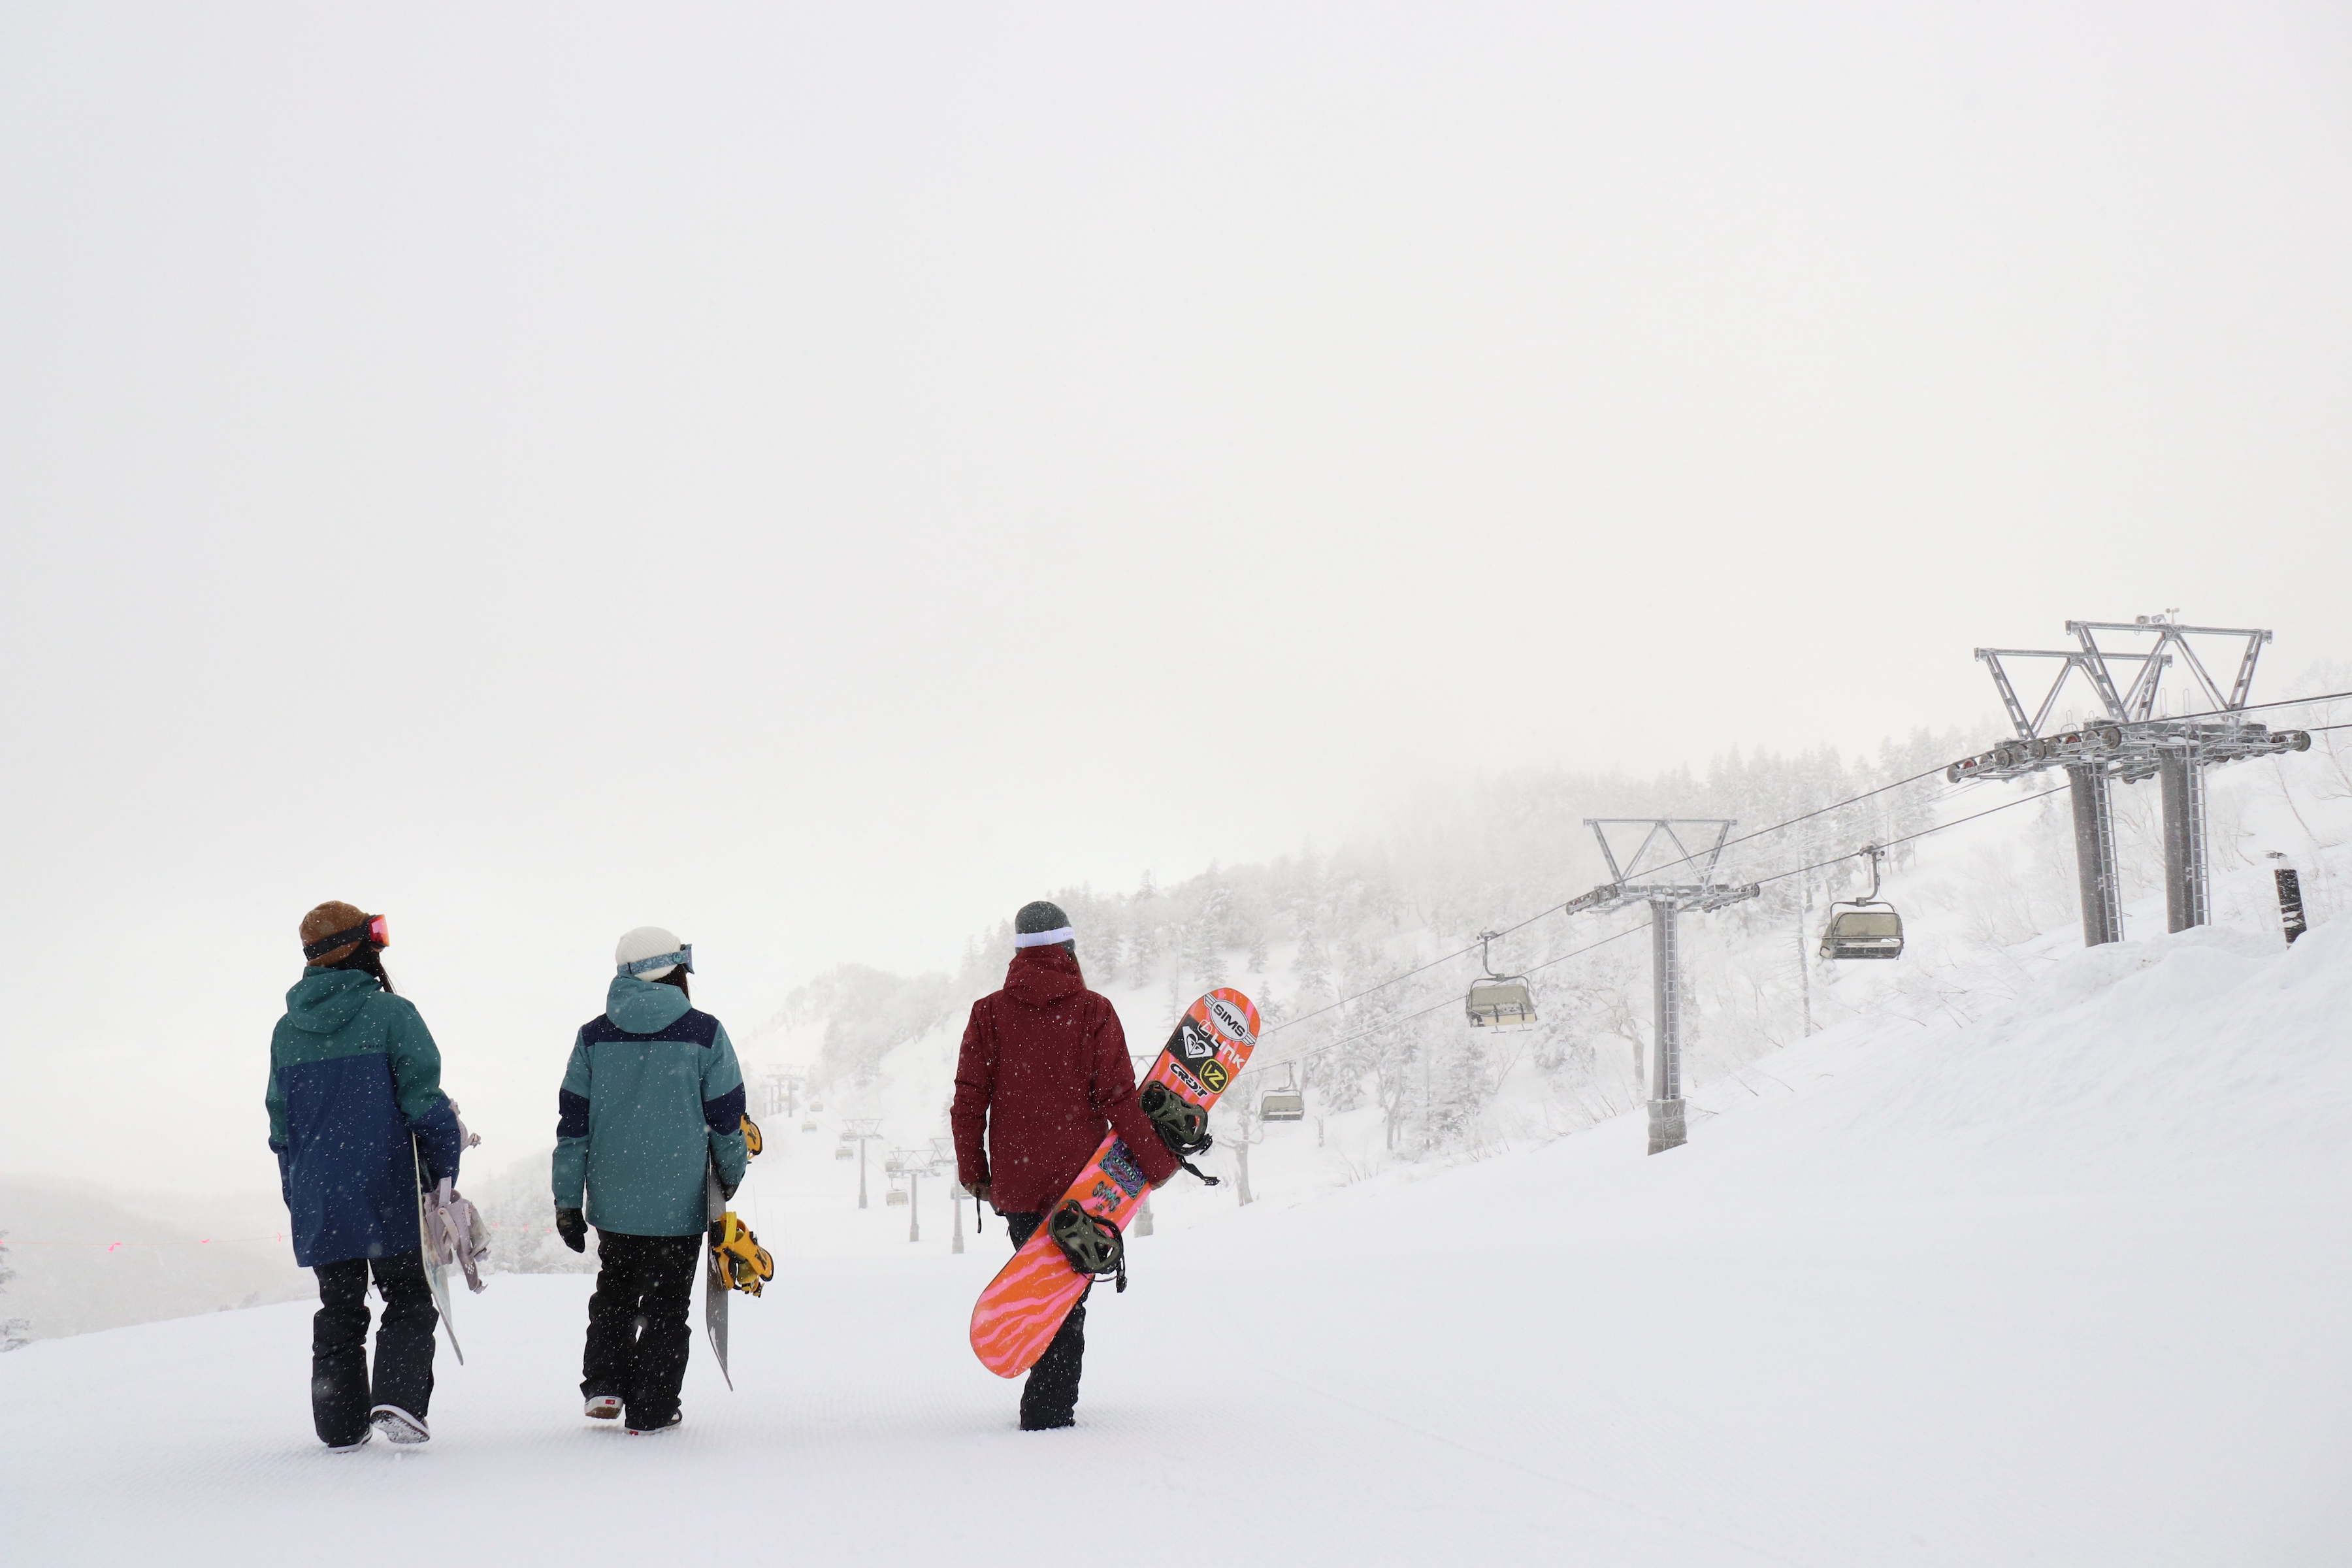 Kawaba Ski Resort Lift 1-day Package (1,000-yen meal + 500-yen gift ticket + POWDER LOUNGE usage tickets included)